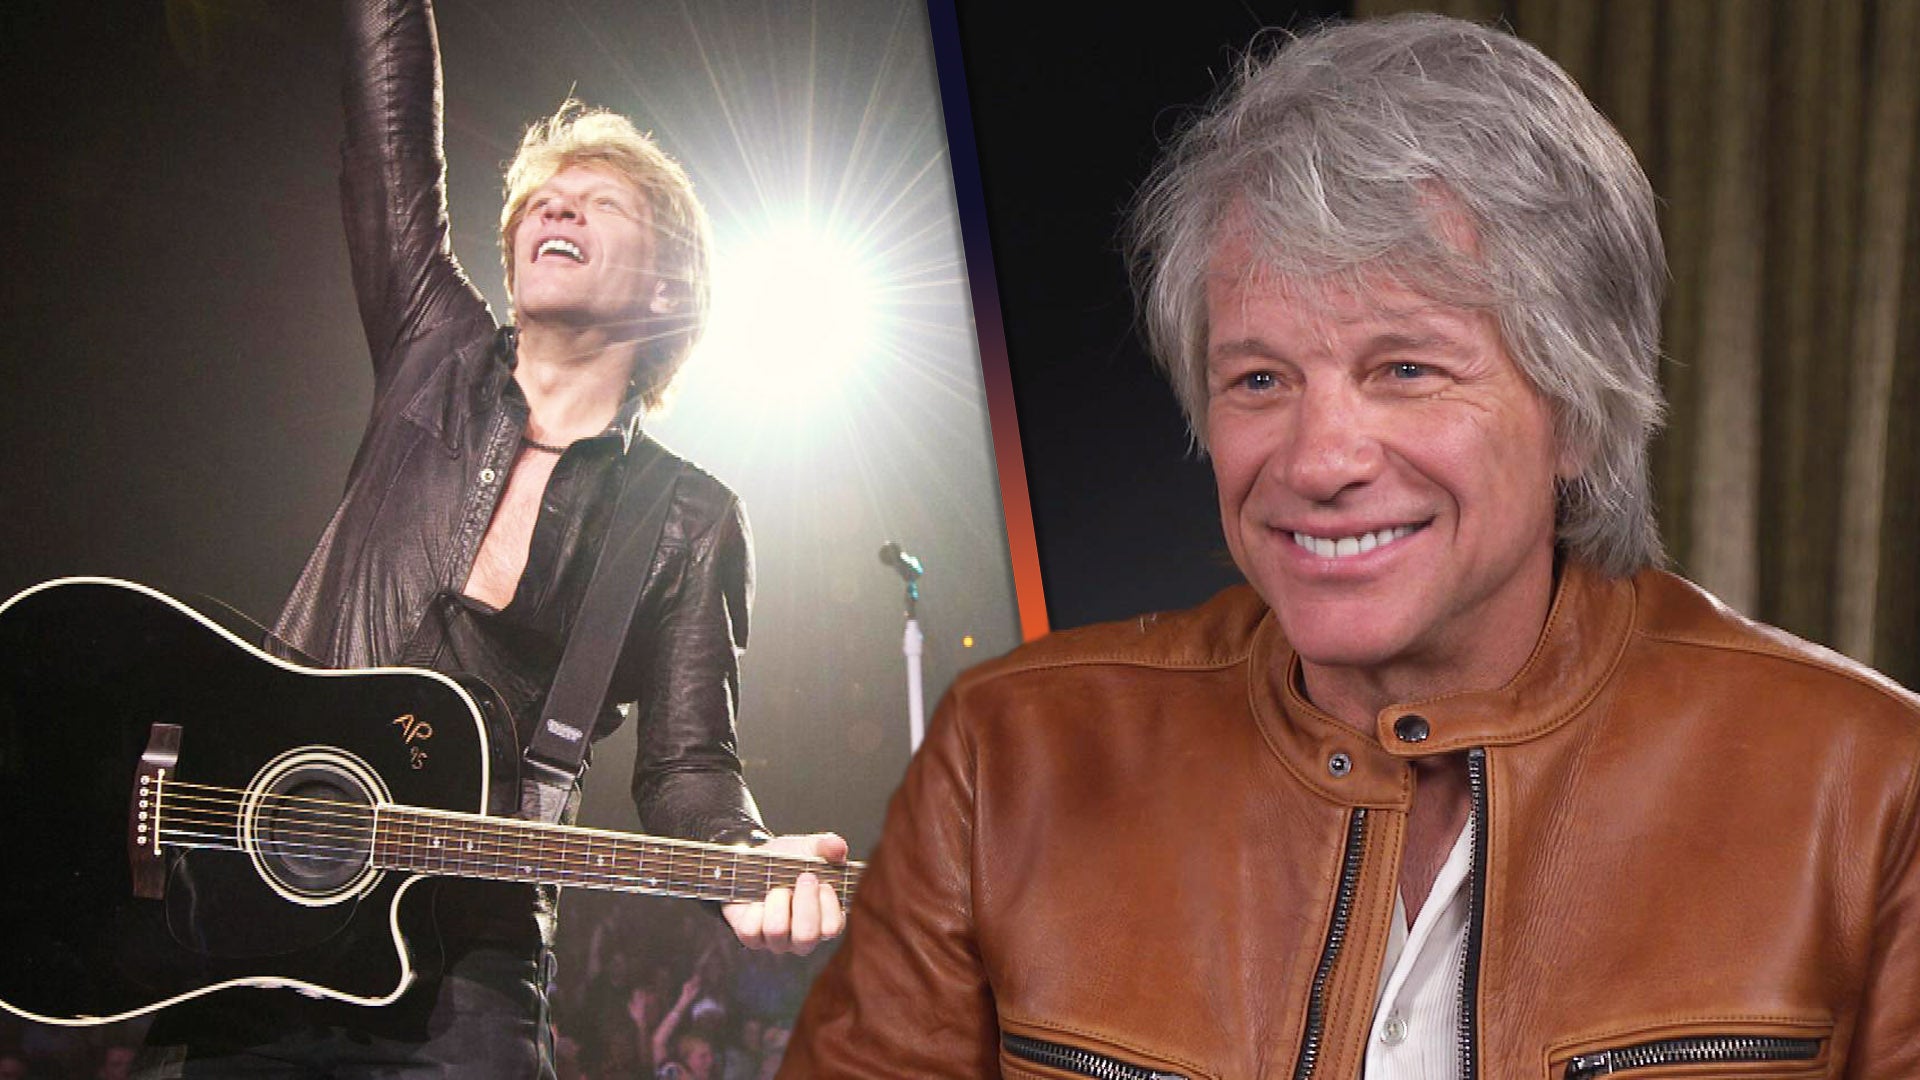 Jon Bon Jovi Is Leaving Another Tour "Up to God" as He Recovers From Vocal Cord Surgery (Exclusive)